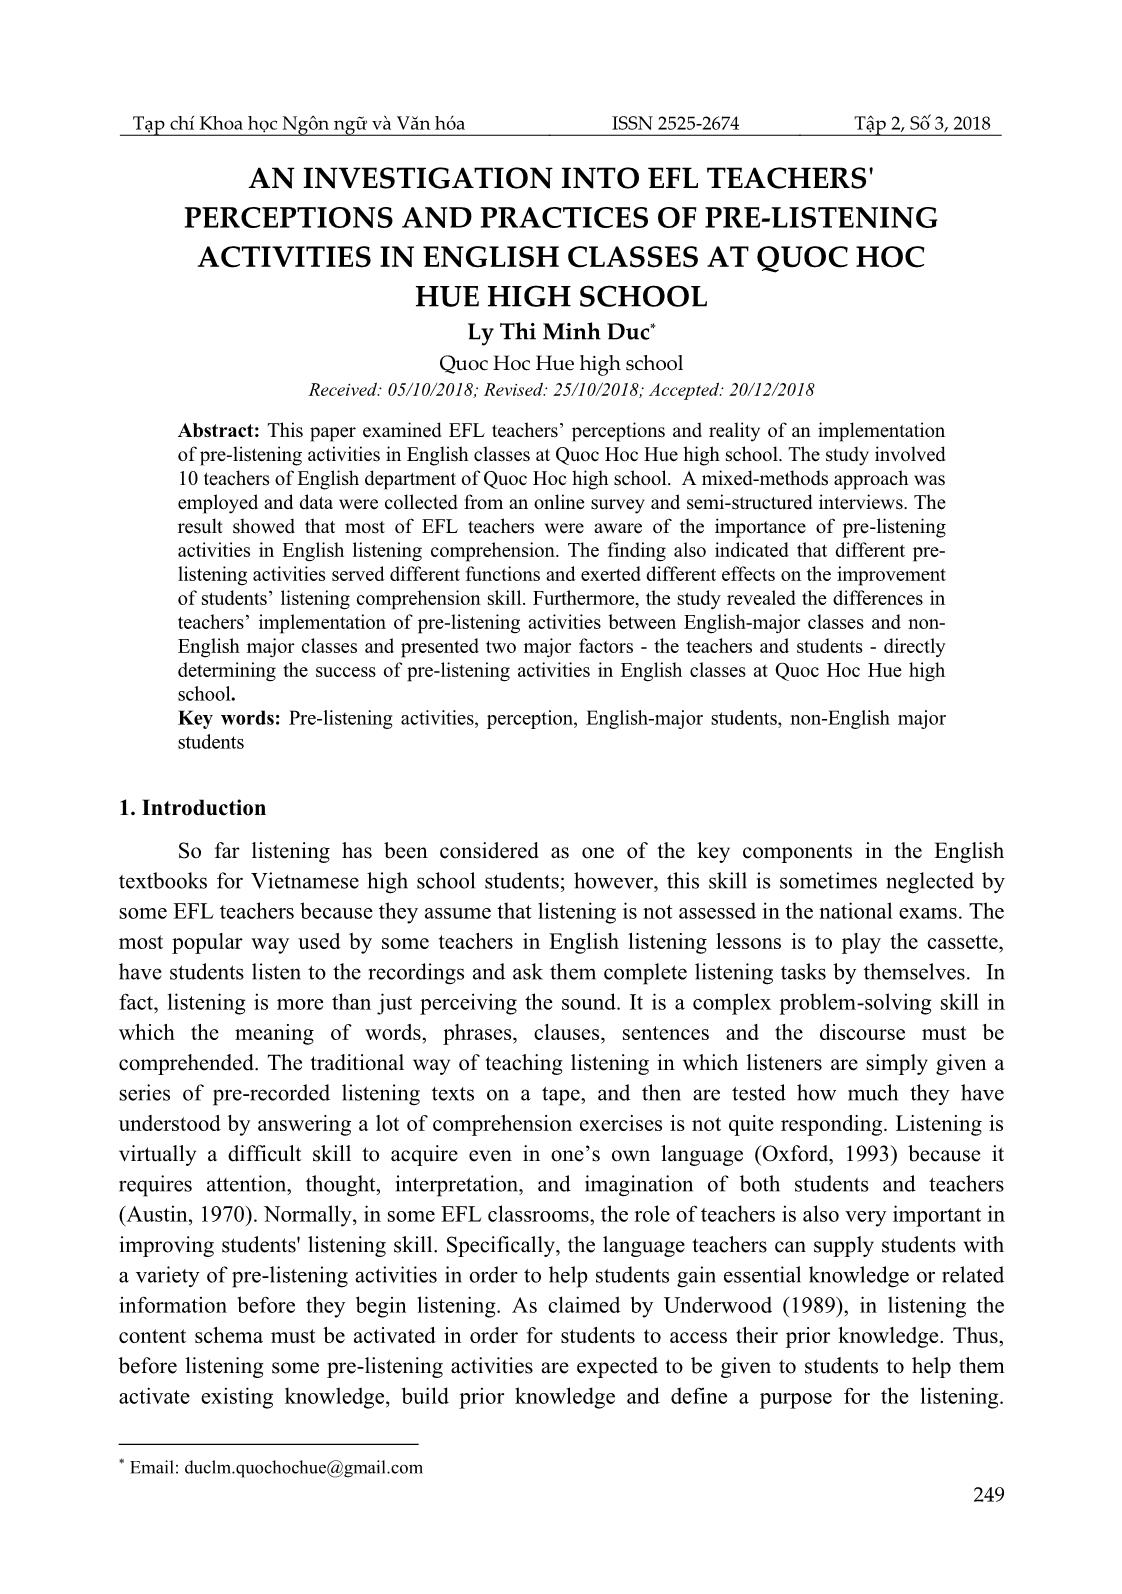 An investigation into efl teachers perceptions and practices of pre-Listening activities in english classes at Quoc Hoc Hue high school trang 1